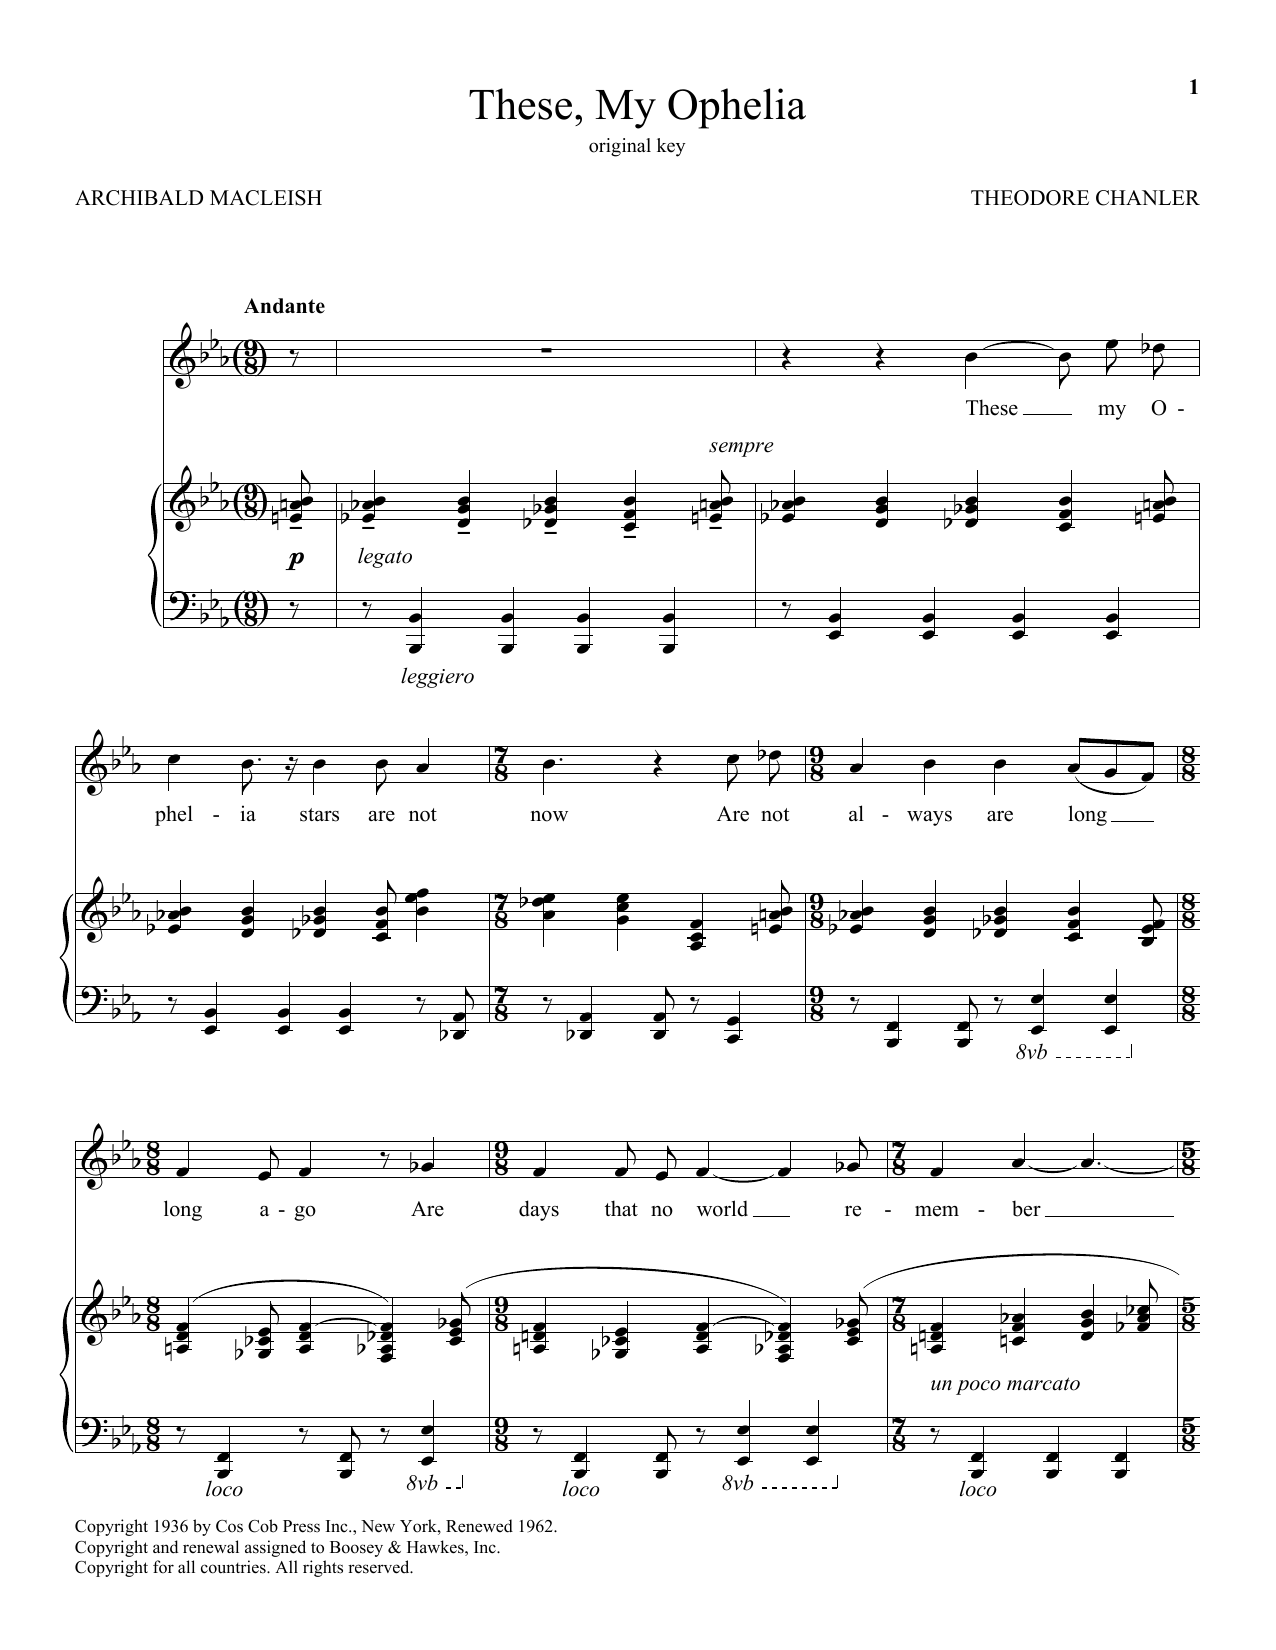 Download Theodore Chanler These, My Ophelia Sheet Music